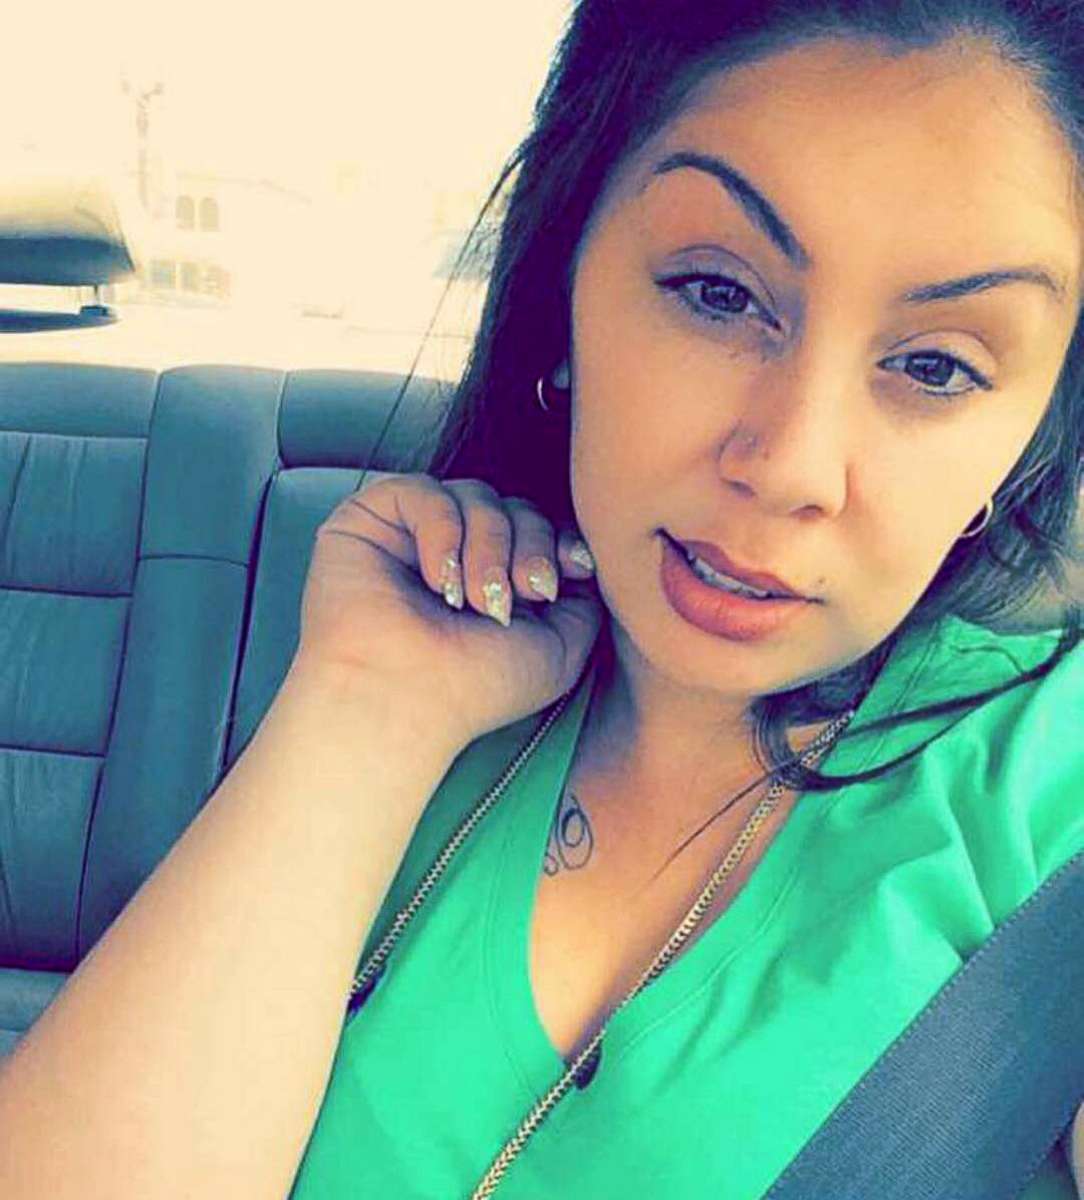 PHOTO: Priscilla Castro, 32, of Vallejo, Calif., is pictured in a photo published to Facebook by the Vacaville Police Department on Sept. 11, 2020.